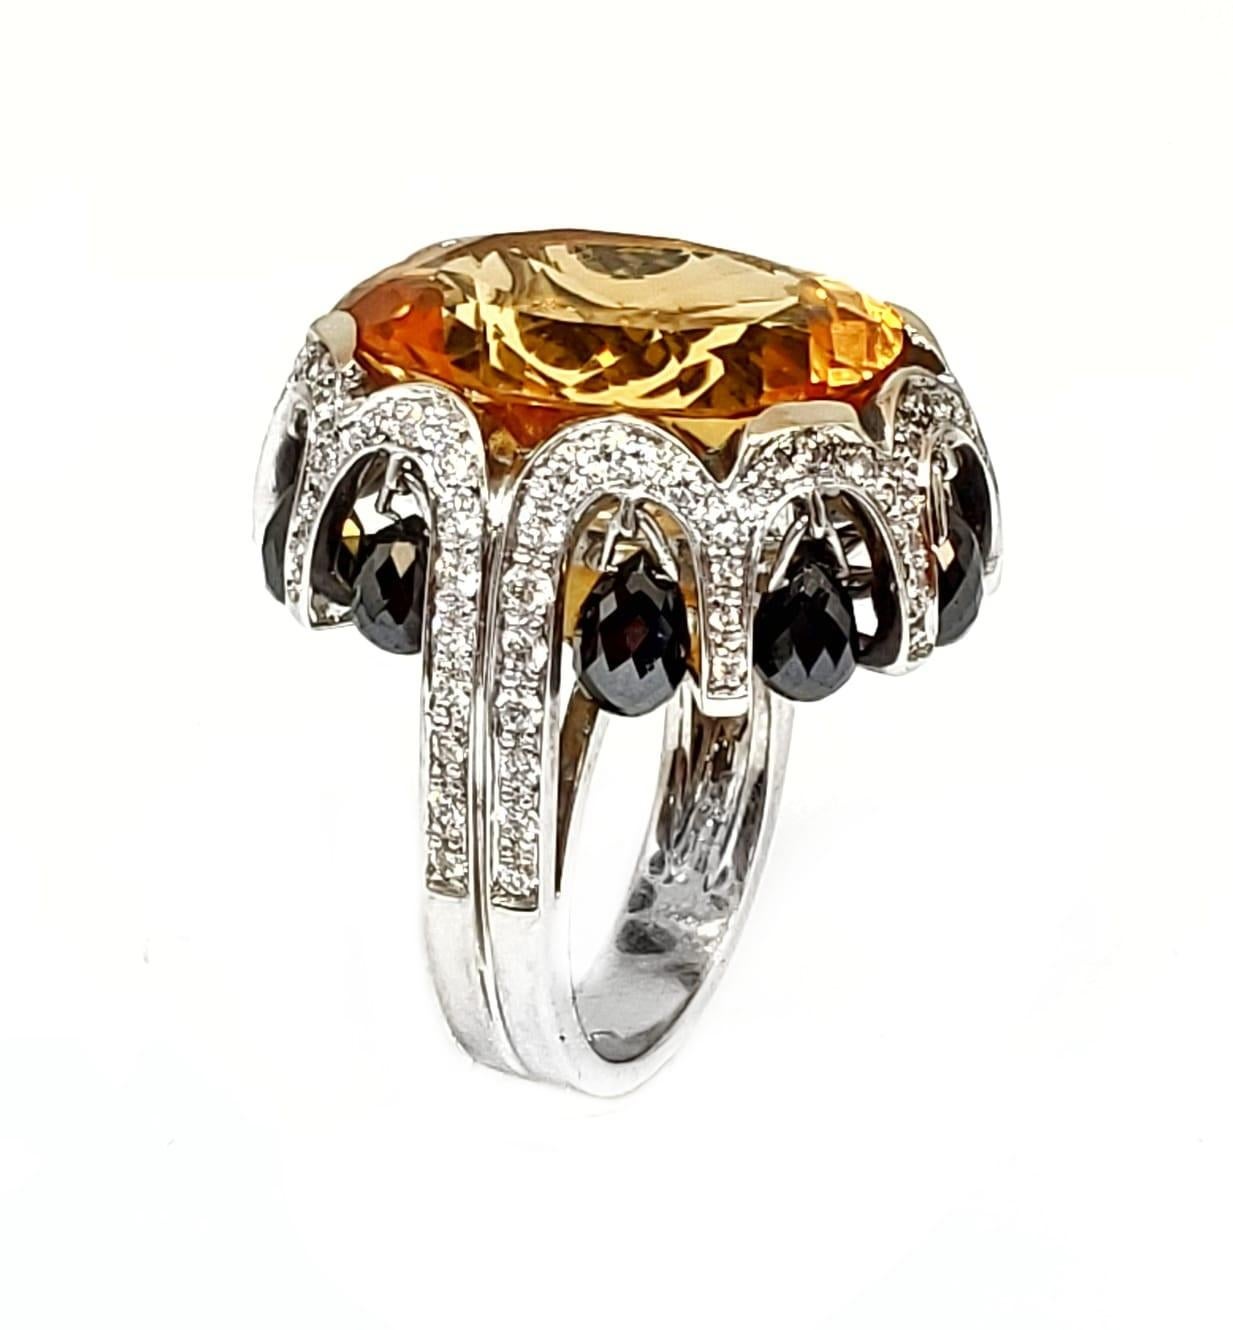 Andreoli Diamond Citrine 18 Karat White Gold Ring

This ring features:
- 7.58 Carat Total Diamond
- Briolette Black Diamond
- 16.74 Carat Citrine
- 18.05 Gram 18K White Gold
- Made In Italy